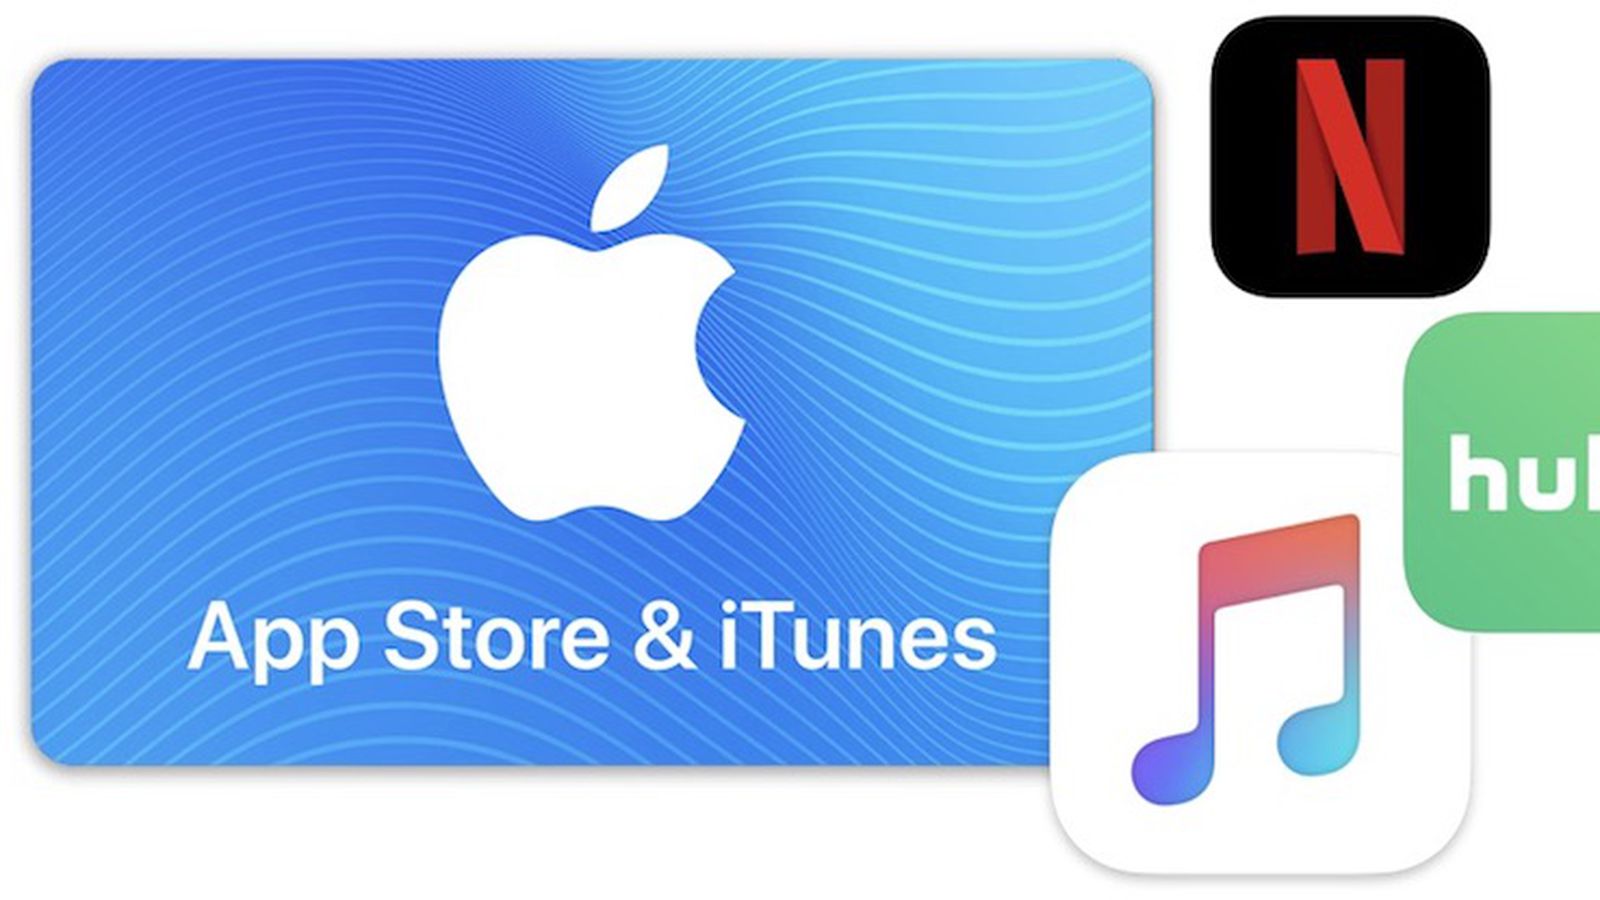 🏆Apple iTunes Gift Card 1000 RUBLES🏅PRICE🔥✅